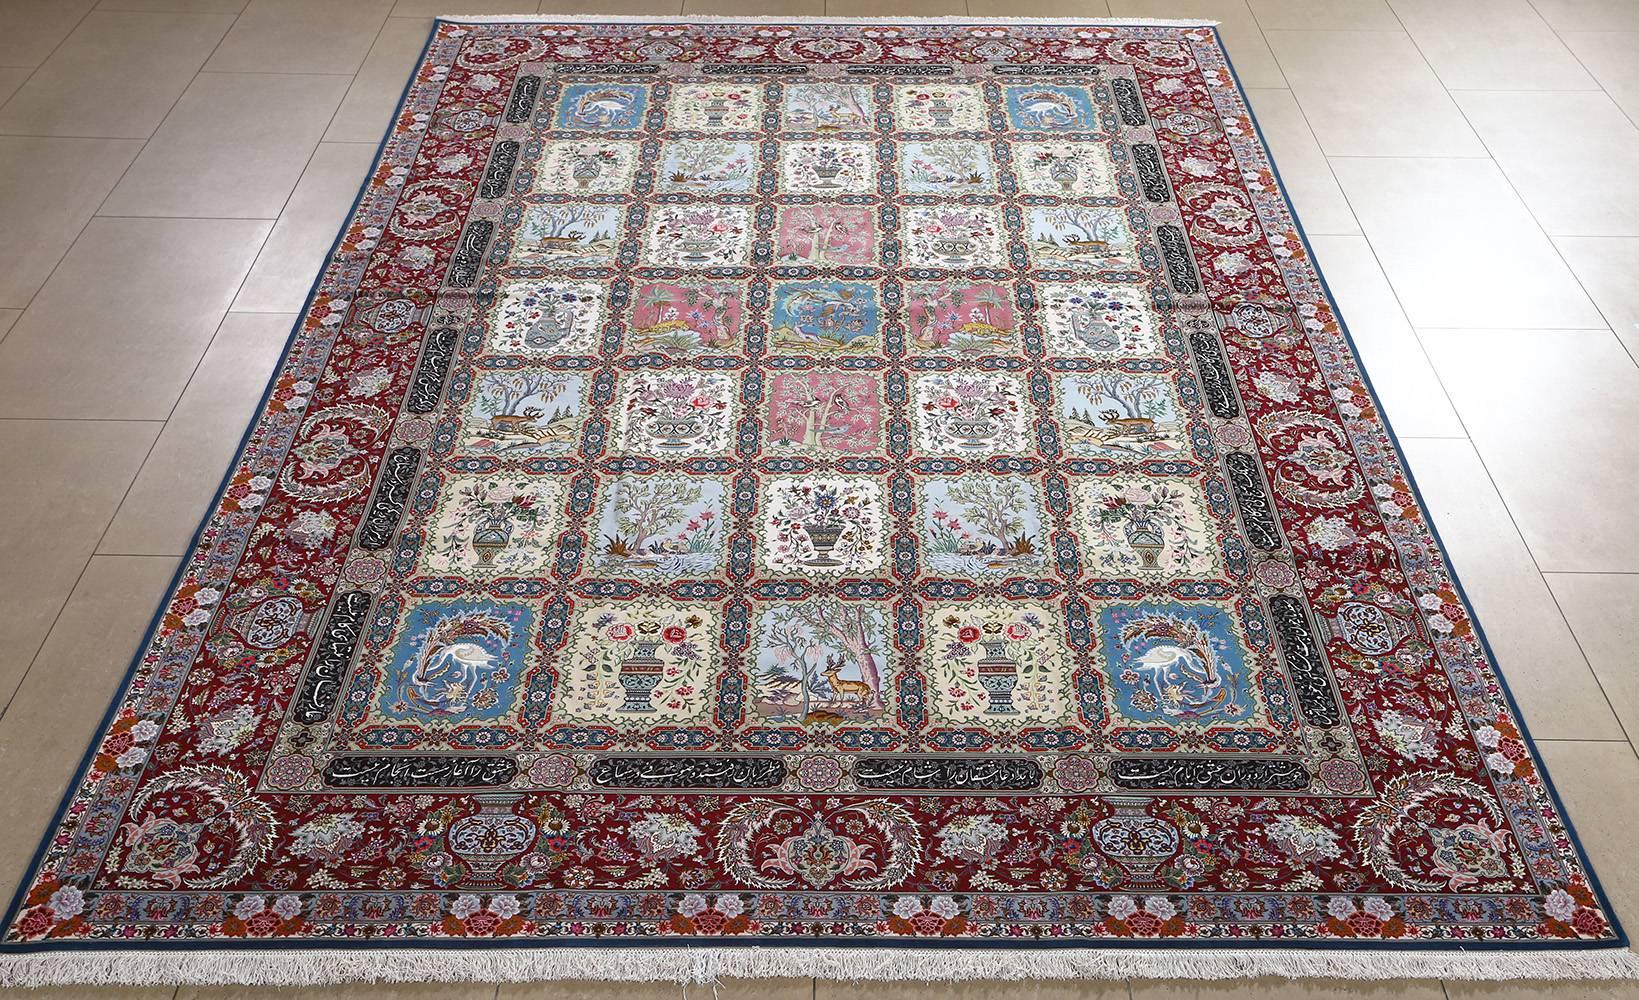 Wool Nazmiyal Collection Vintage Tabriz Persian Rug. Size: 10 ft 7 in x 15 ft 11 in